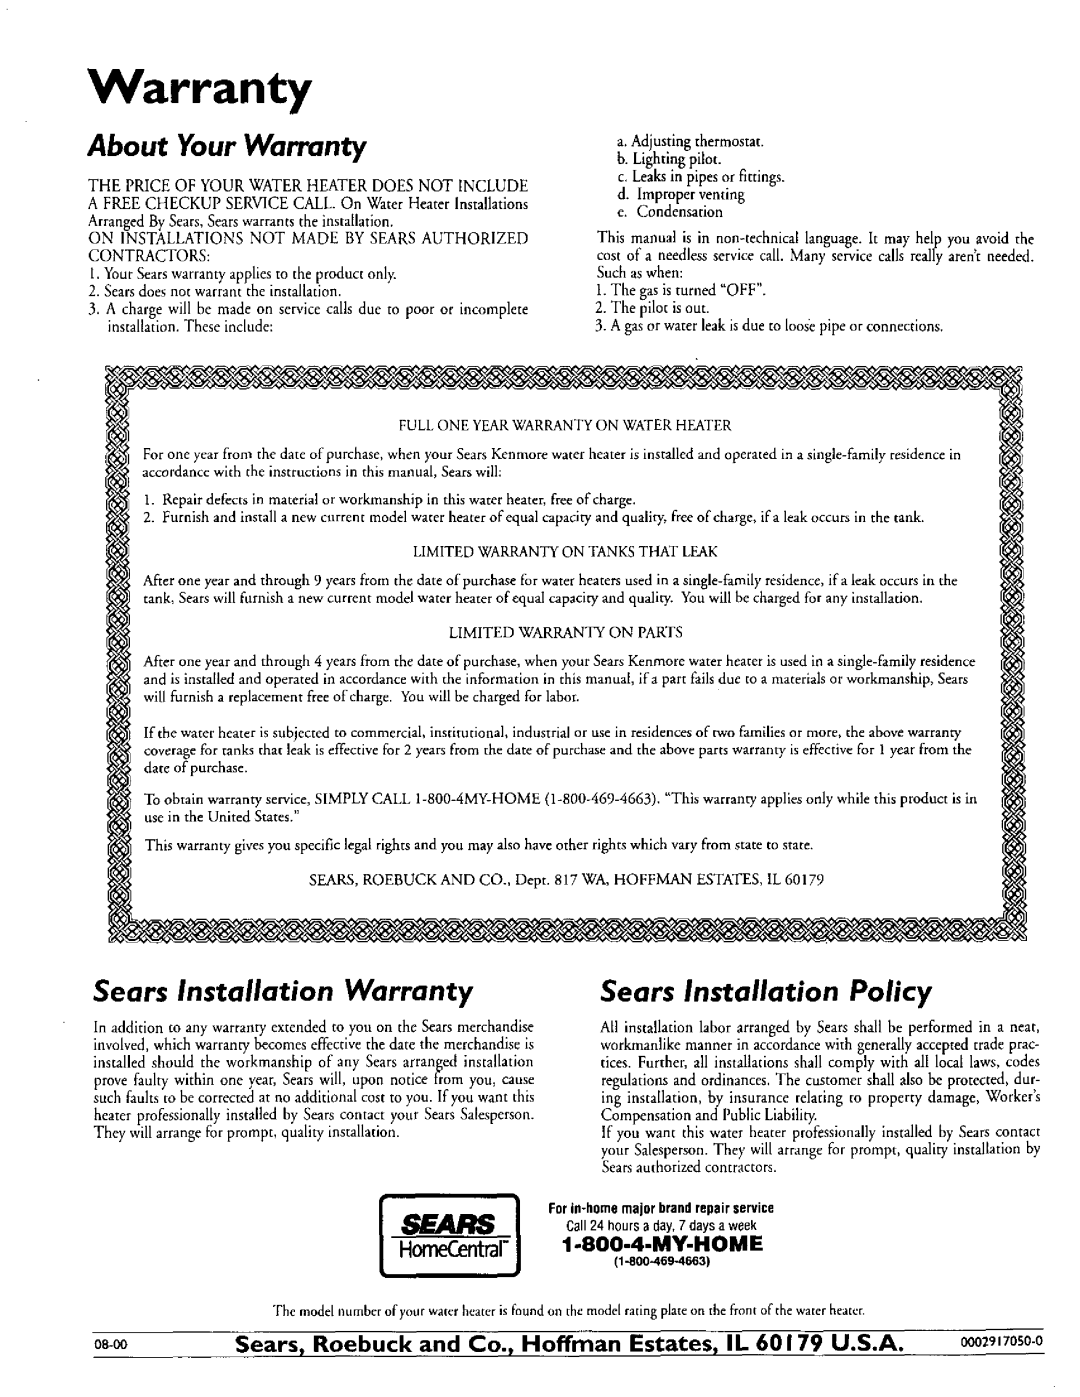 Kenmore 153.335863 About Your Warranty, Sears Installation Warranty, Sears Installation Policy, HomeCentral 